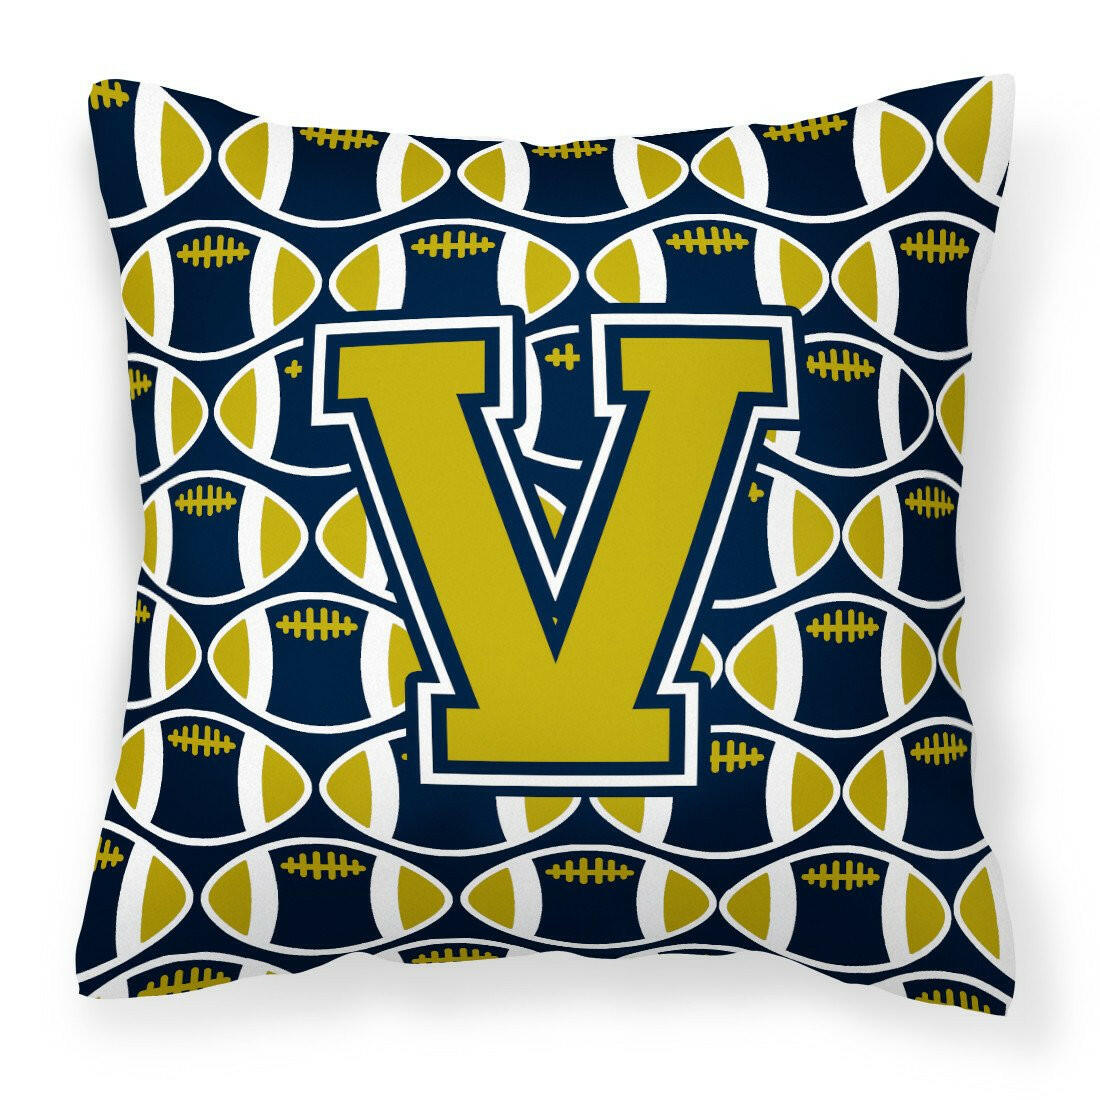 Letter V Football Blue and Gold Fabric Decorative Pillow CJ1074-VPW1414 by Caroline's Treasures